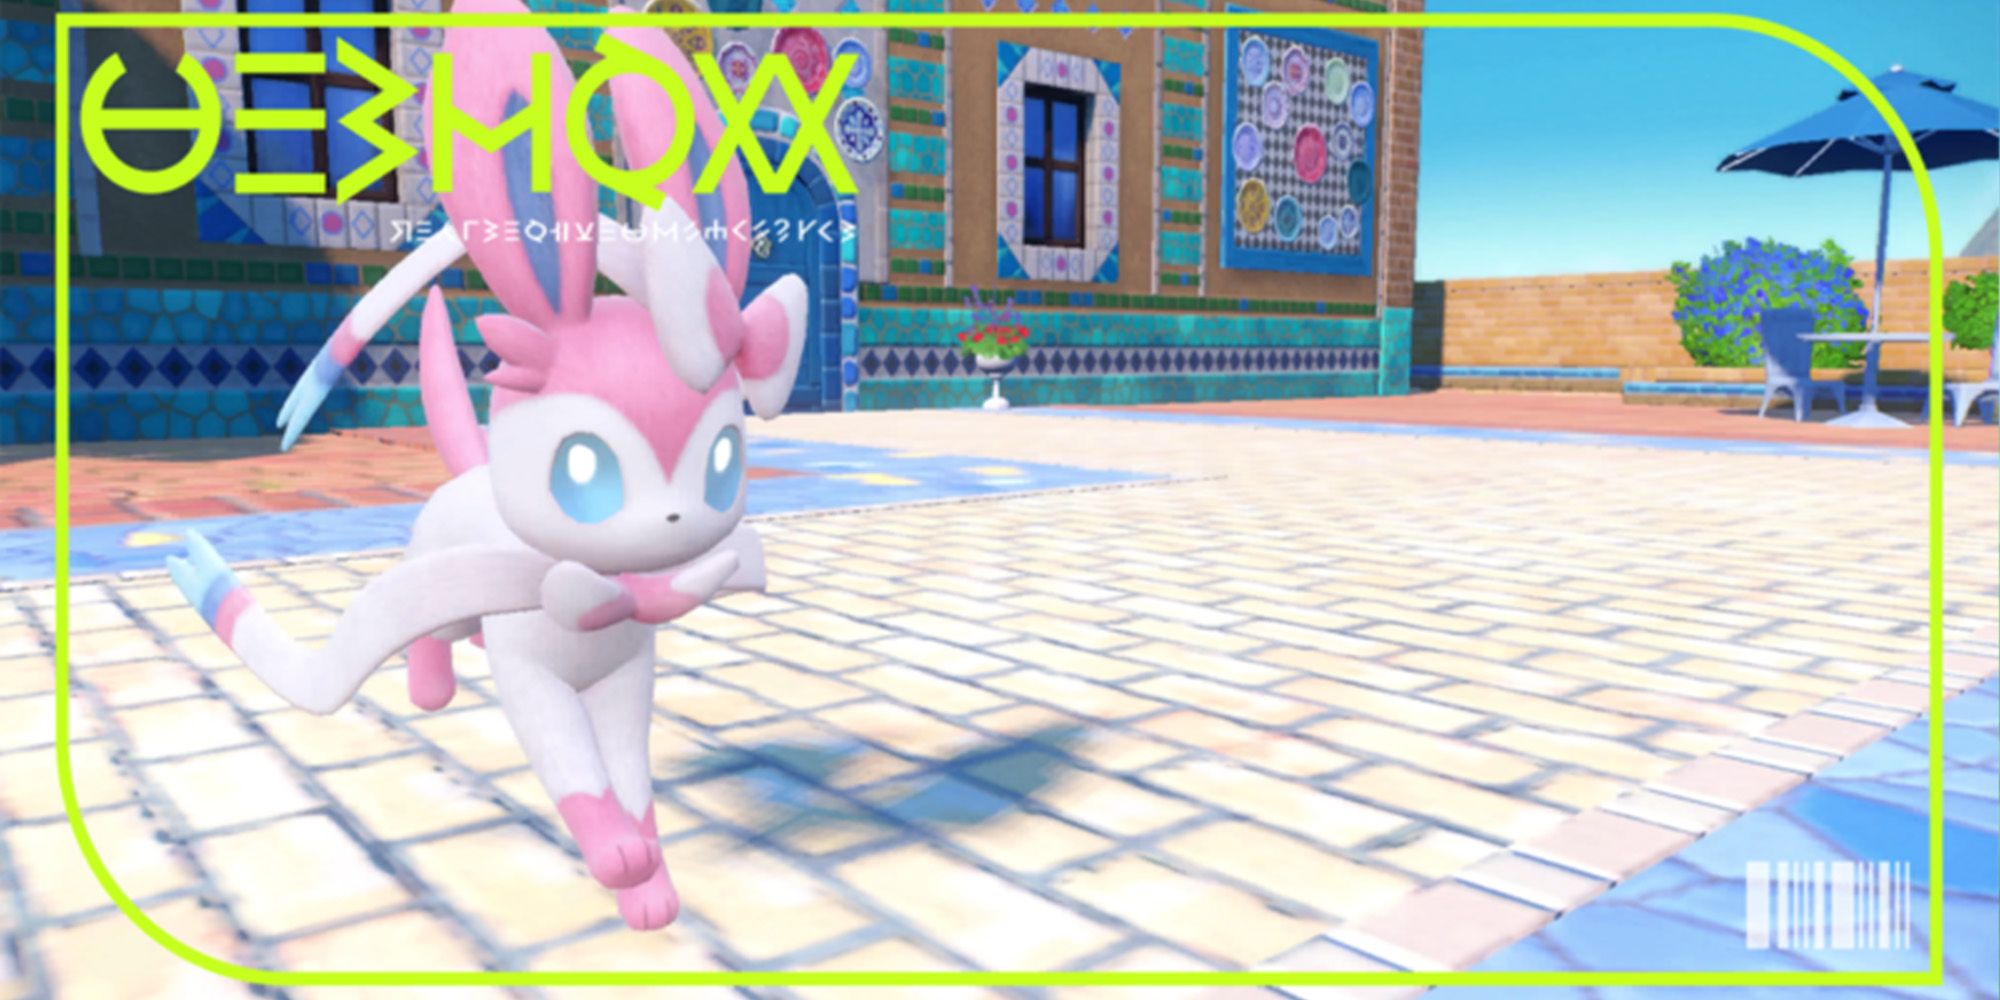 Sylveon Pokedex image in Scarlet Violet Pokedex of sylveon crossing the pavillion in the town square